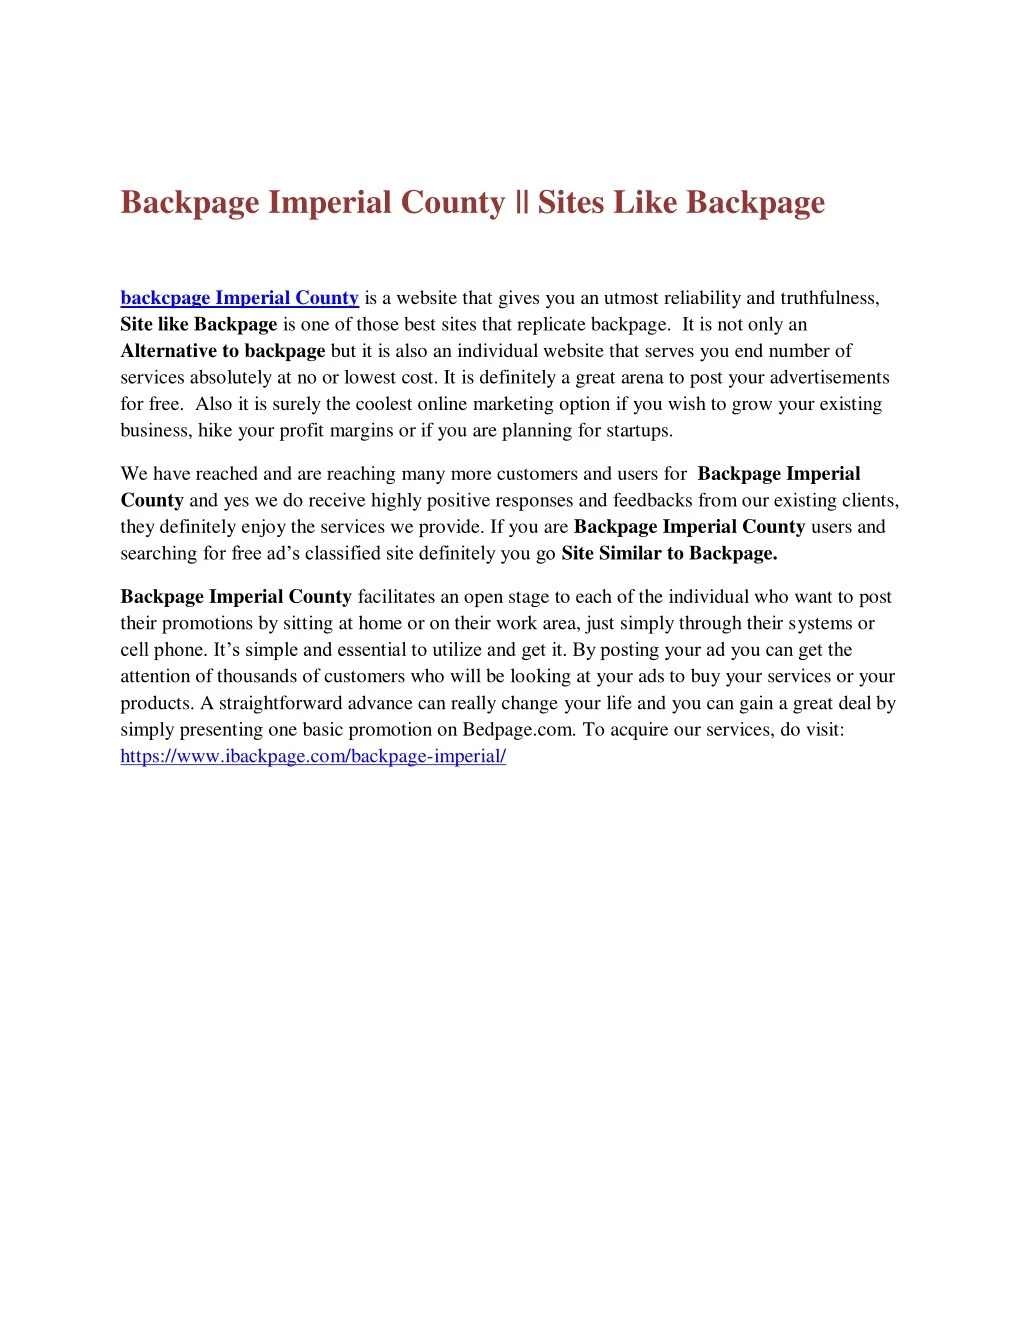 backpage imperial county sites like backpage